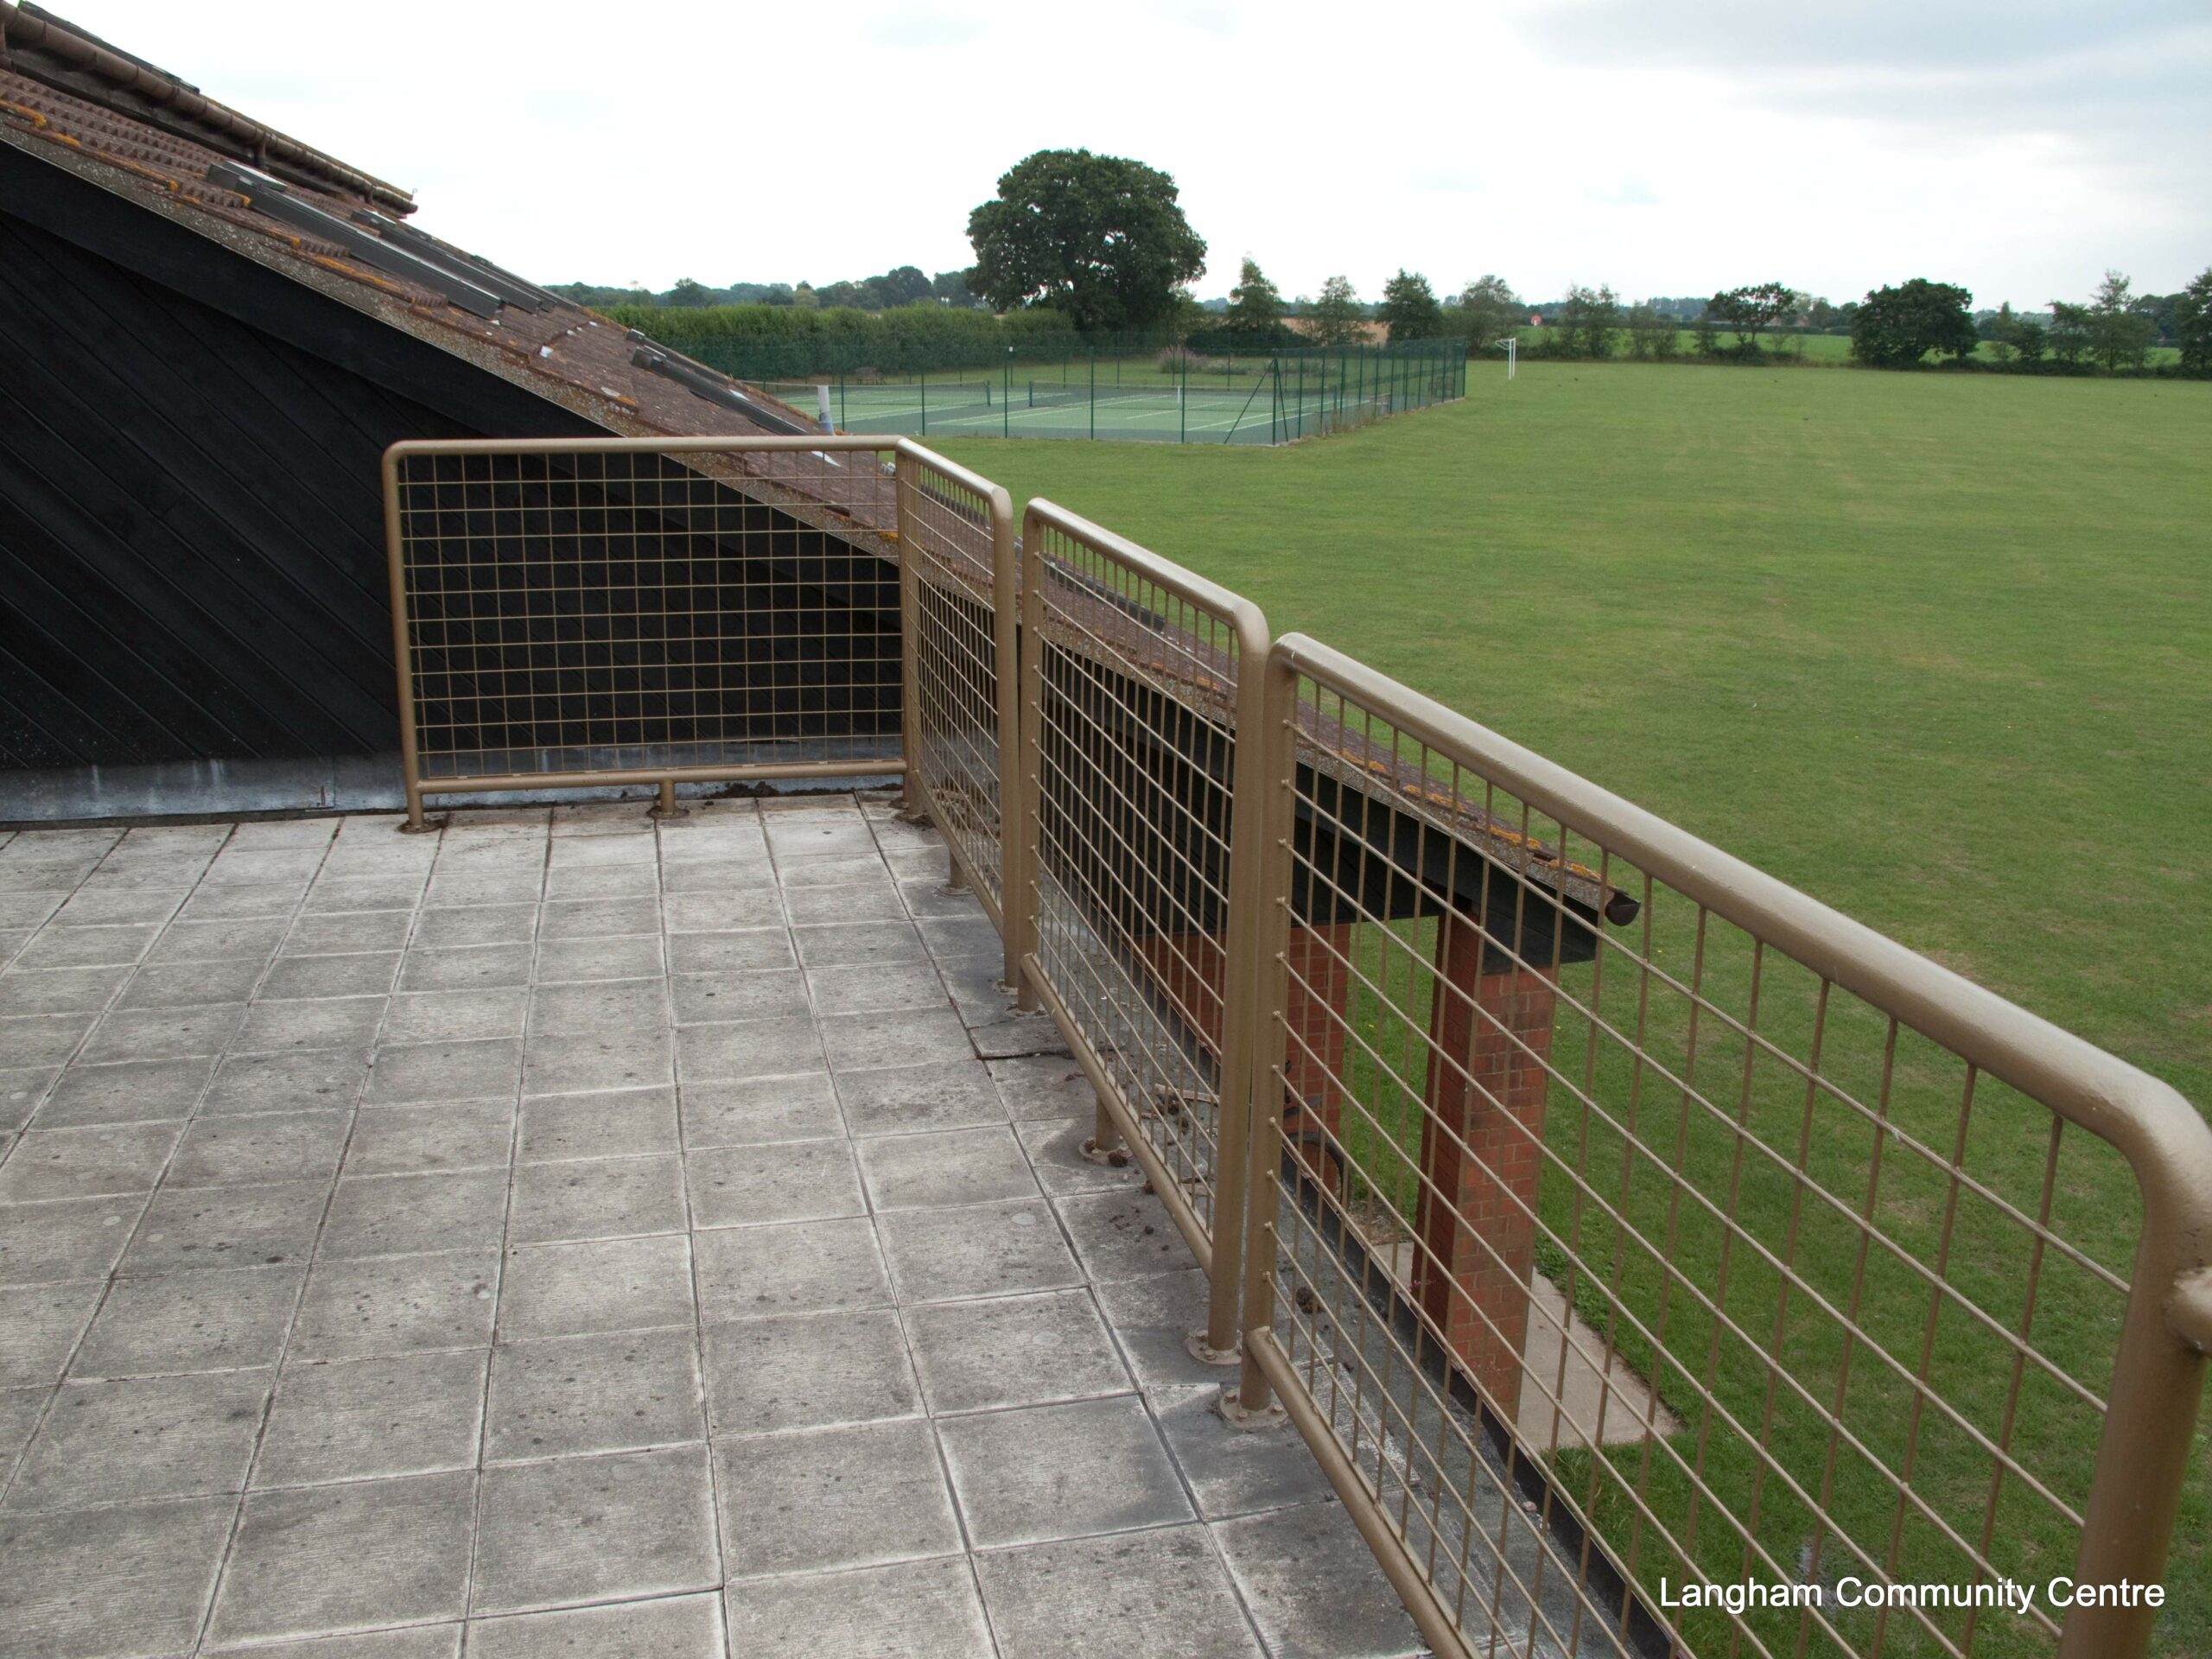 Photo of the Committee Room's balcony, overlooking the tennis courts and the field